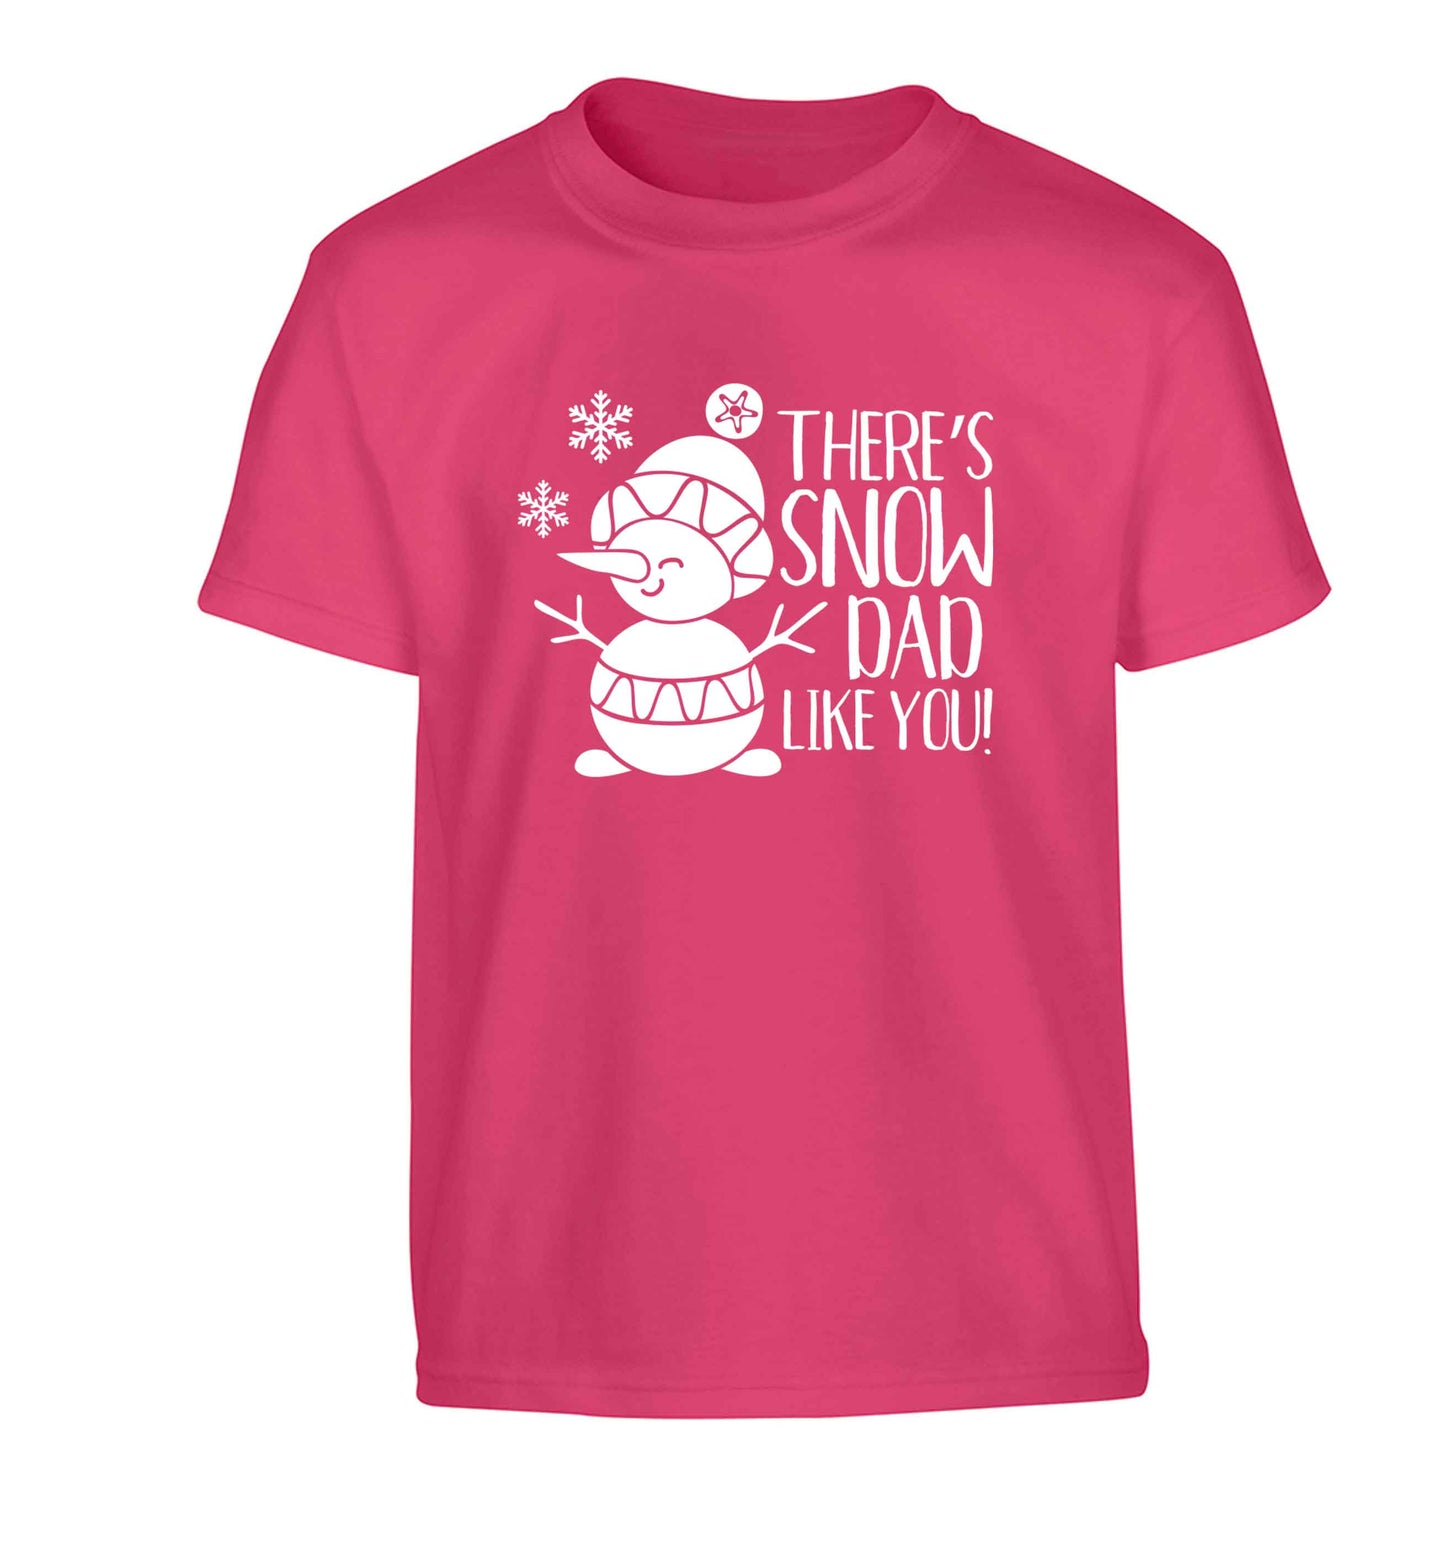 There's snow dad like you Children's pink Tshirt 12-13 Years